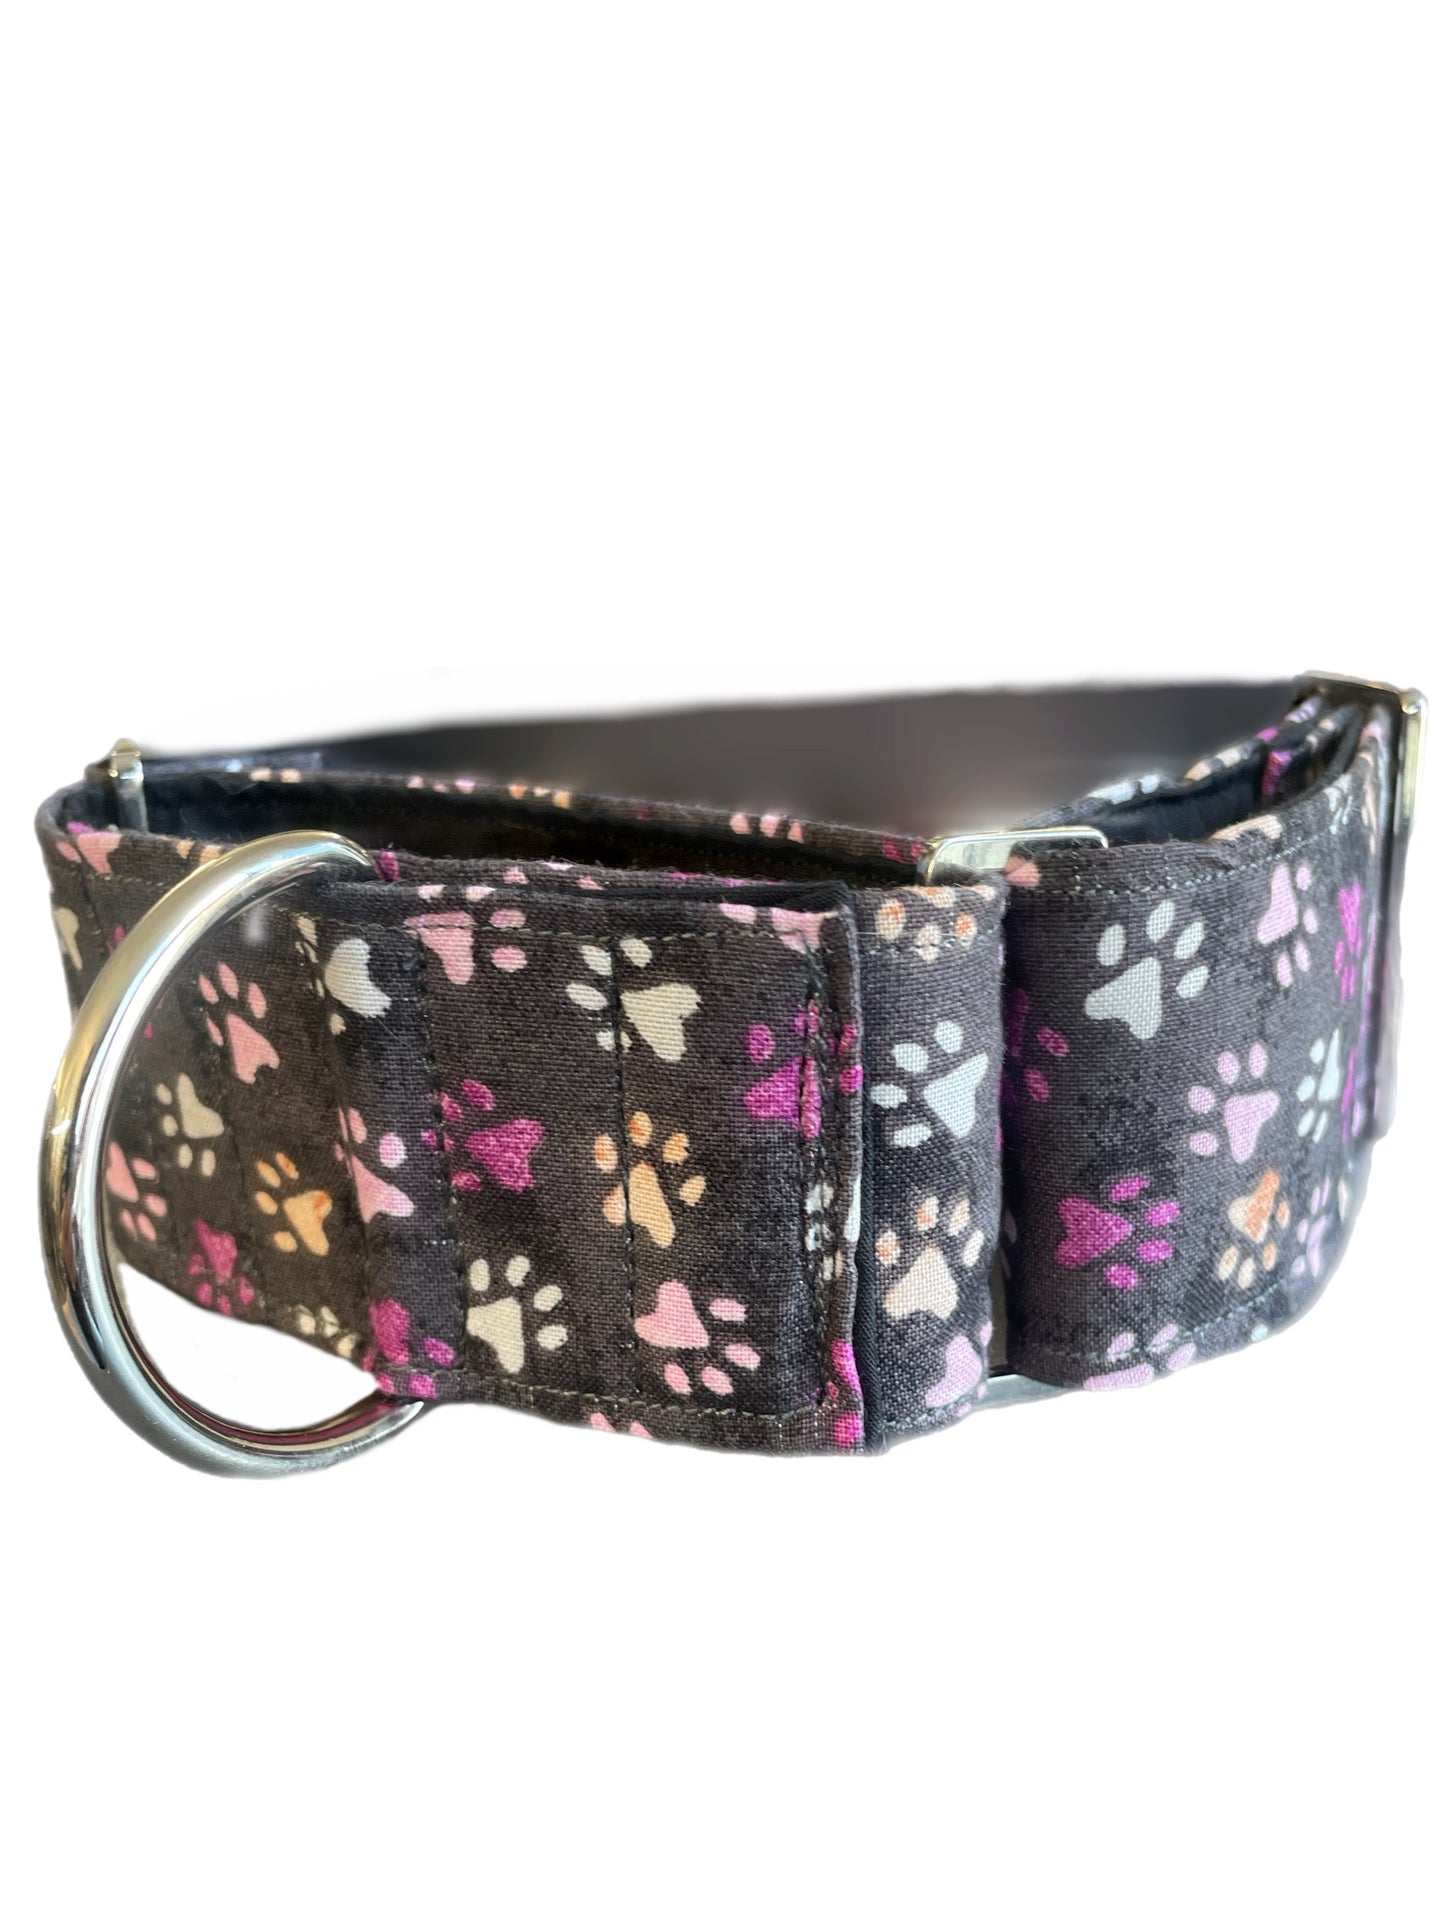 Smoky Grey with paws martingale collar greyhound  in cotton super soft